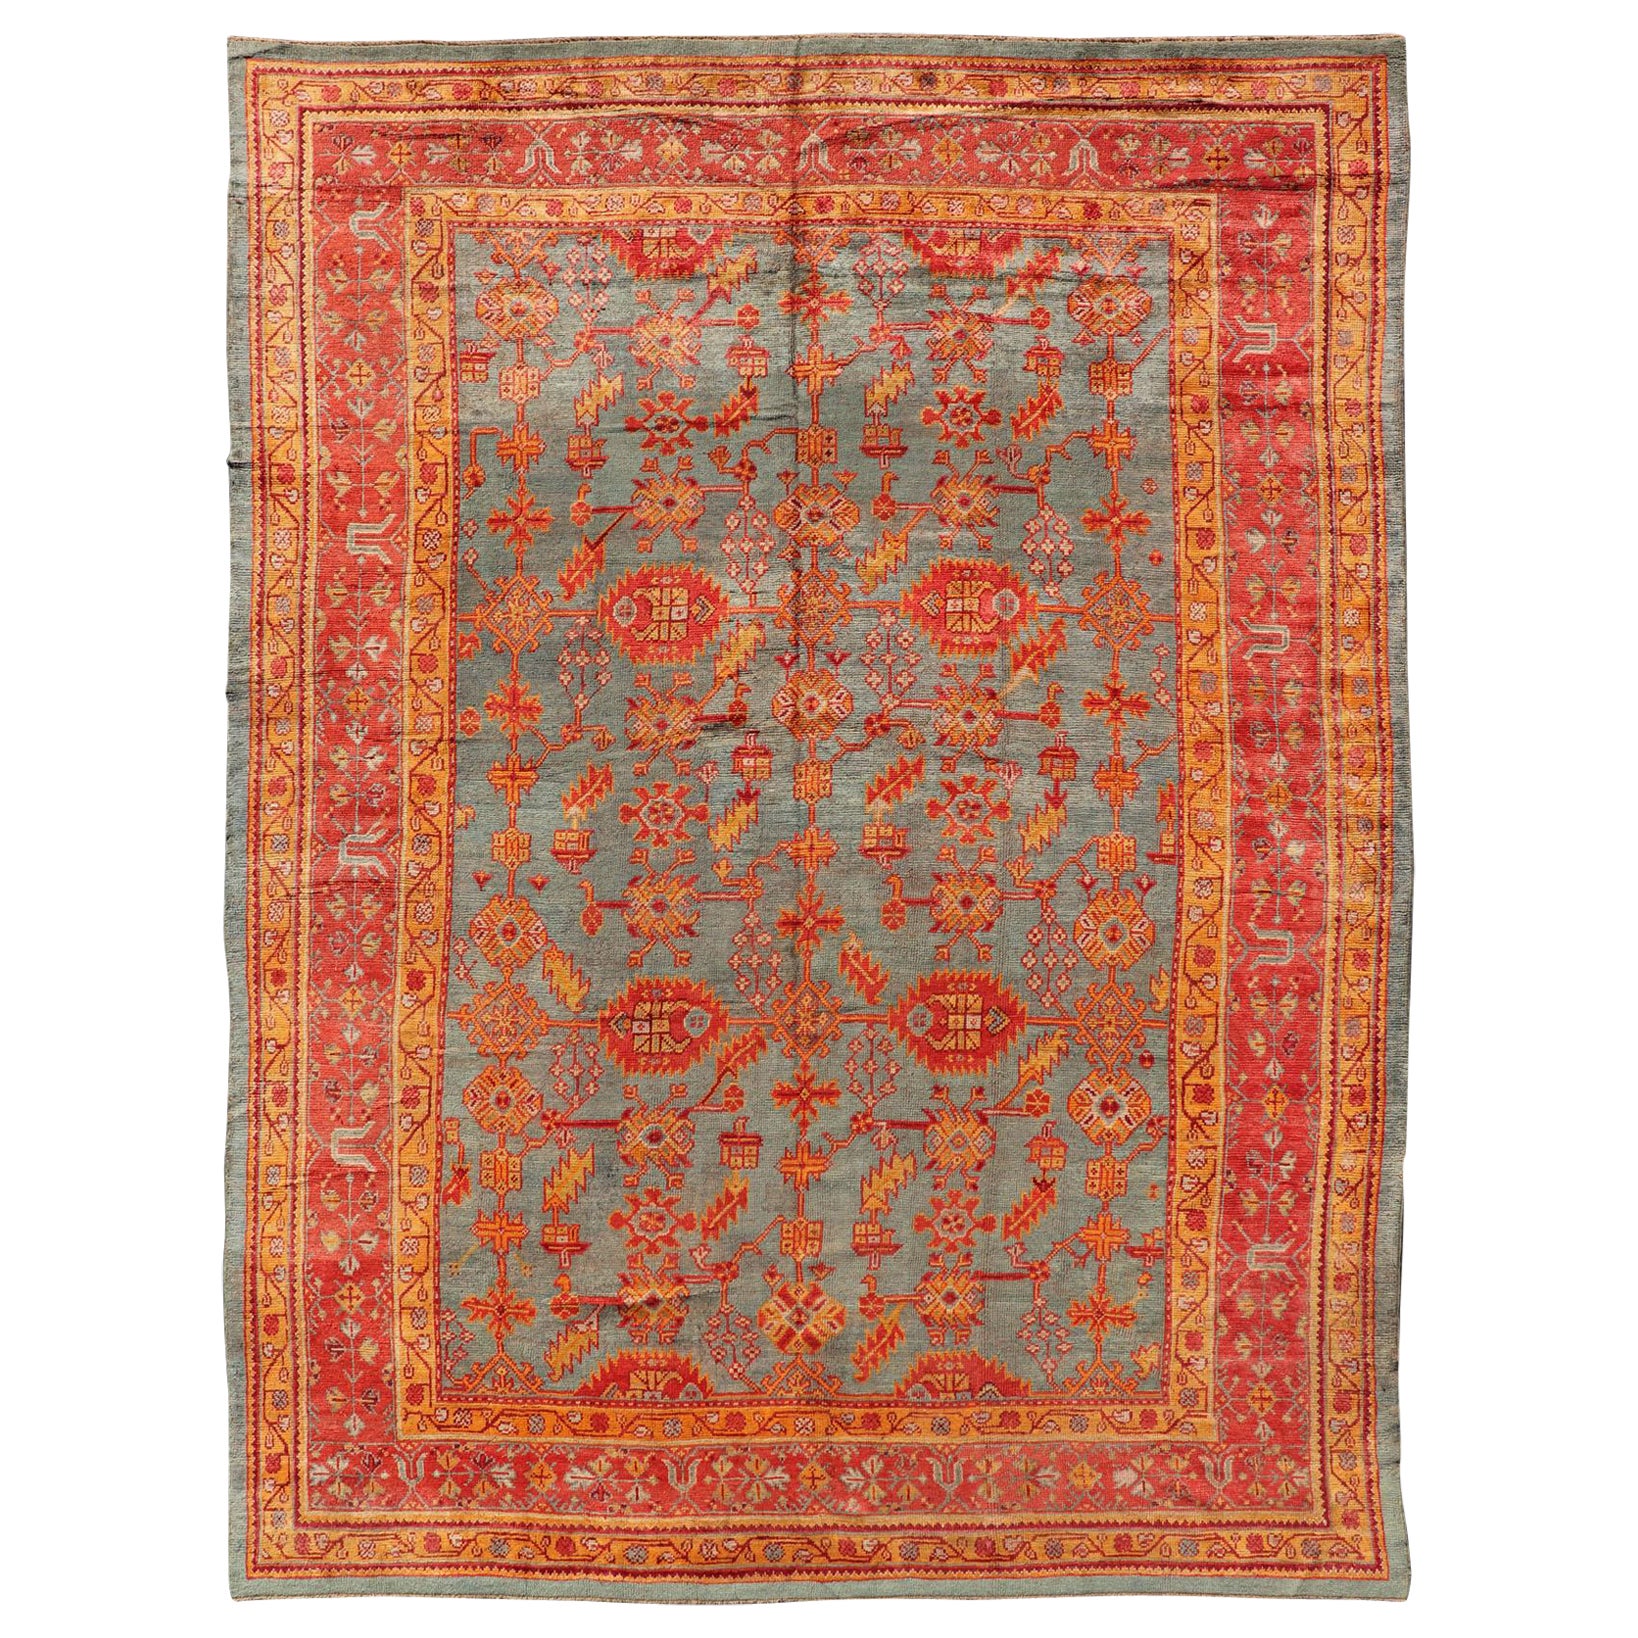 Early 20th Century Antique Turkish Oushak Rug with Flowers and Geometric 